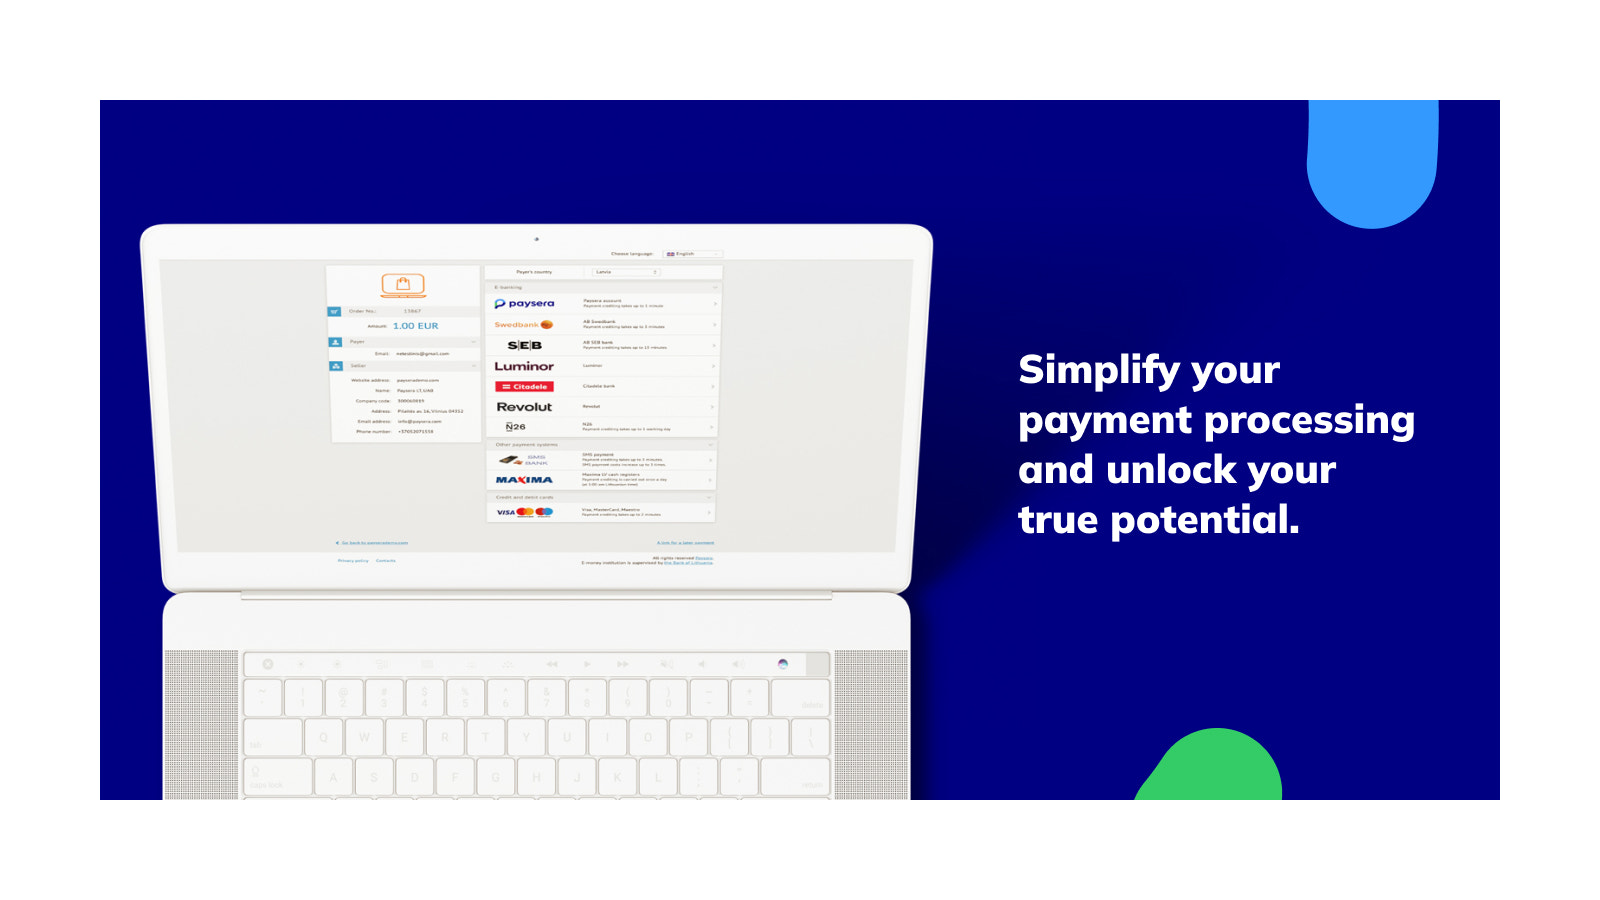 Simplify your payment processing and unlock your true potential